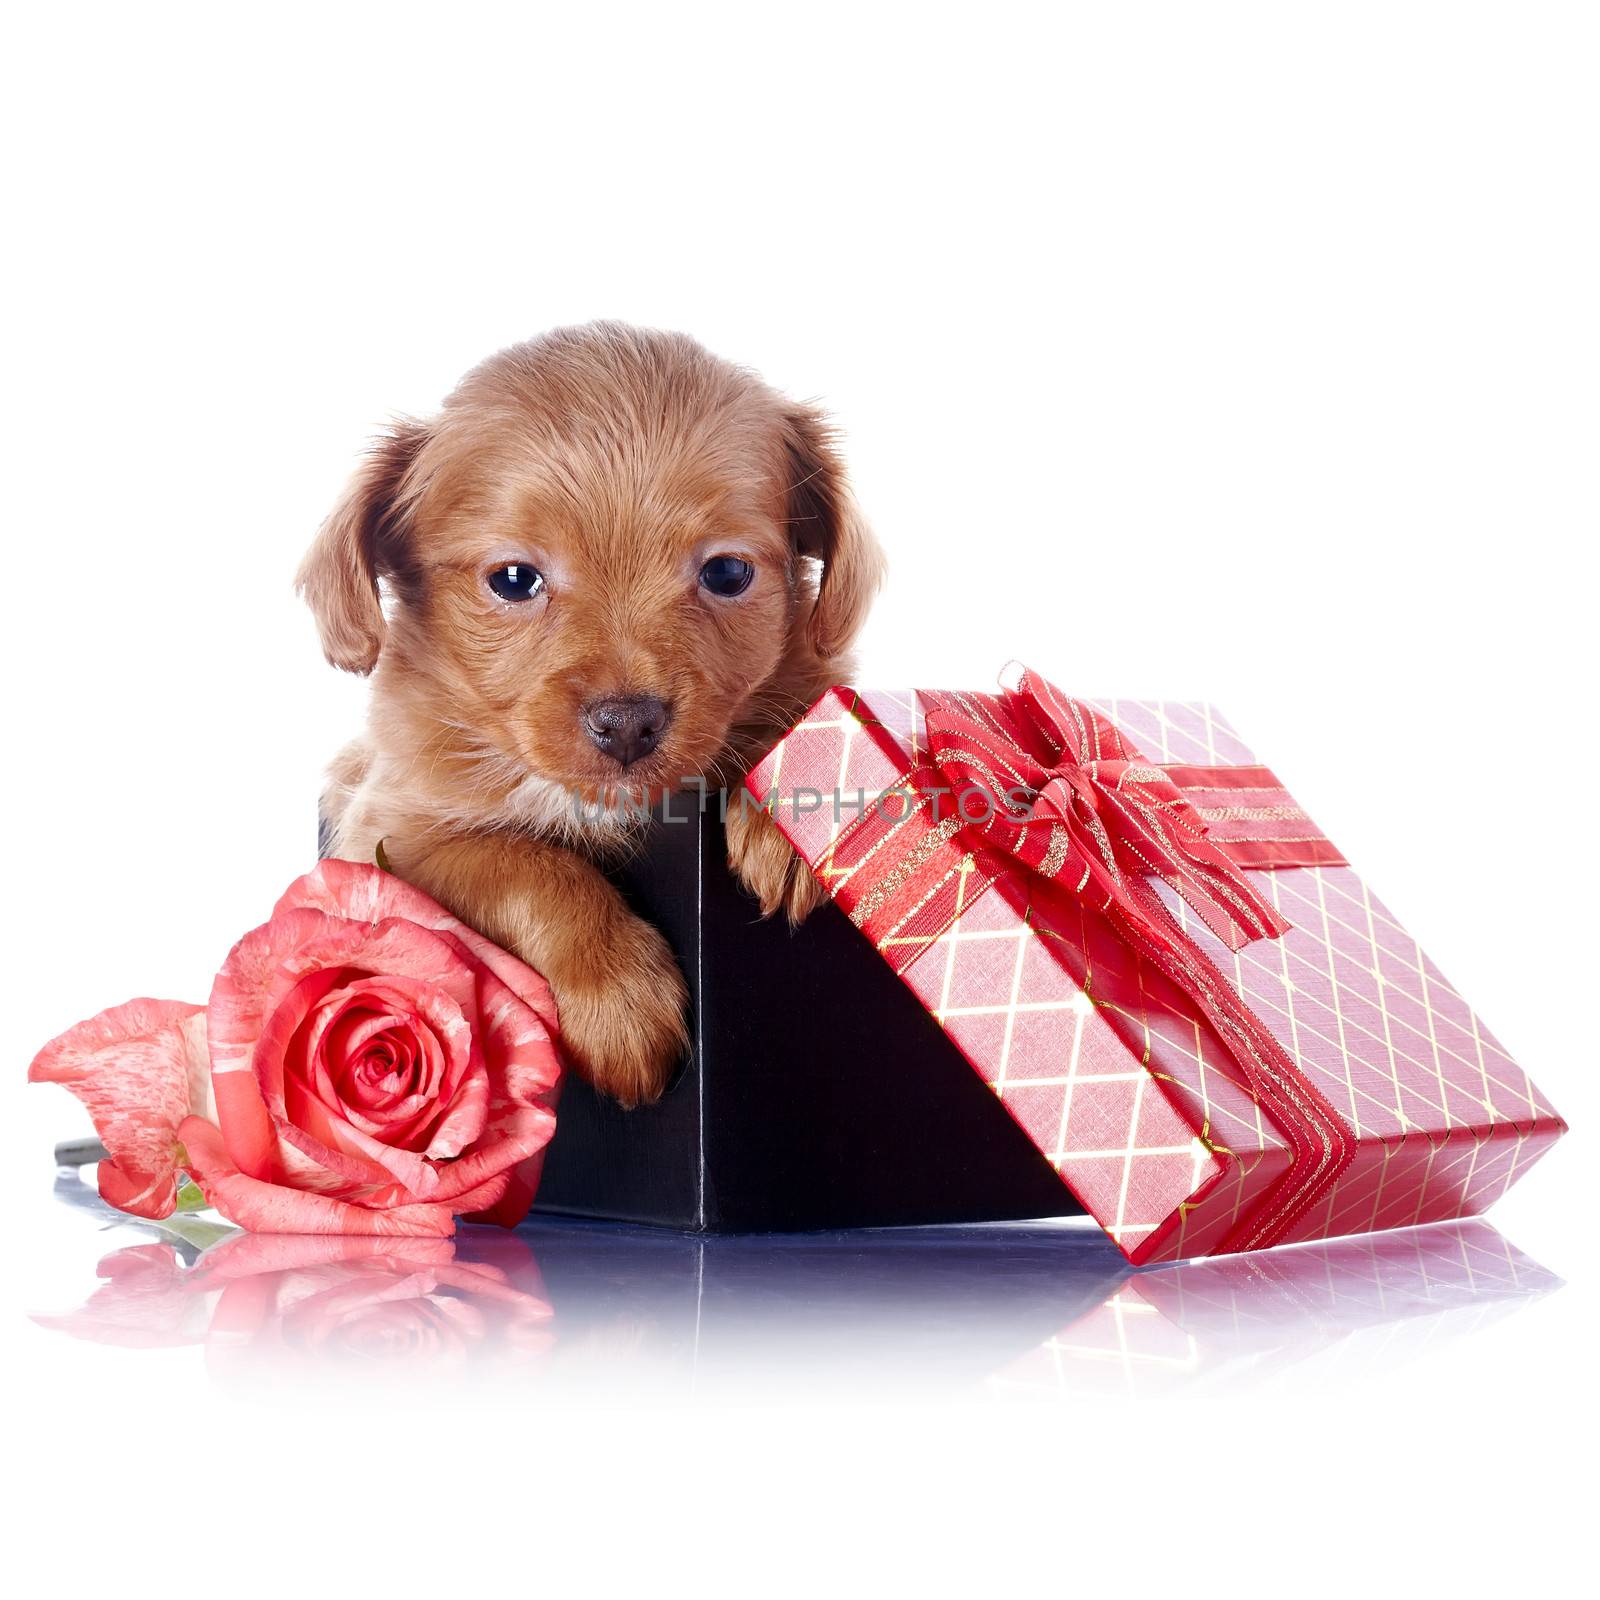 Puppy in a gift box with a bow and a rose by Azaliya